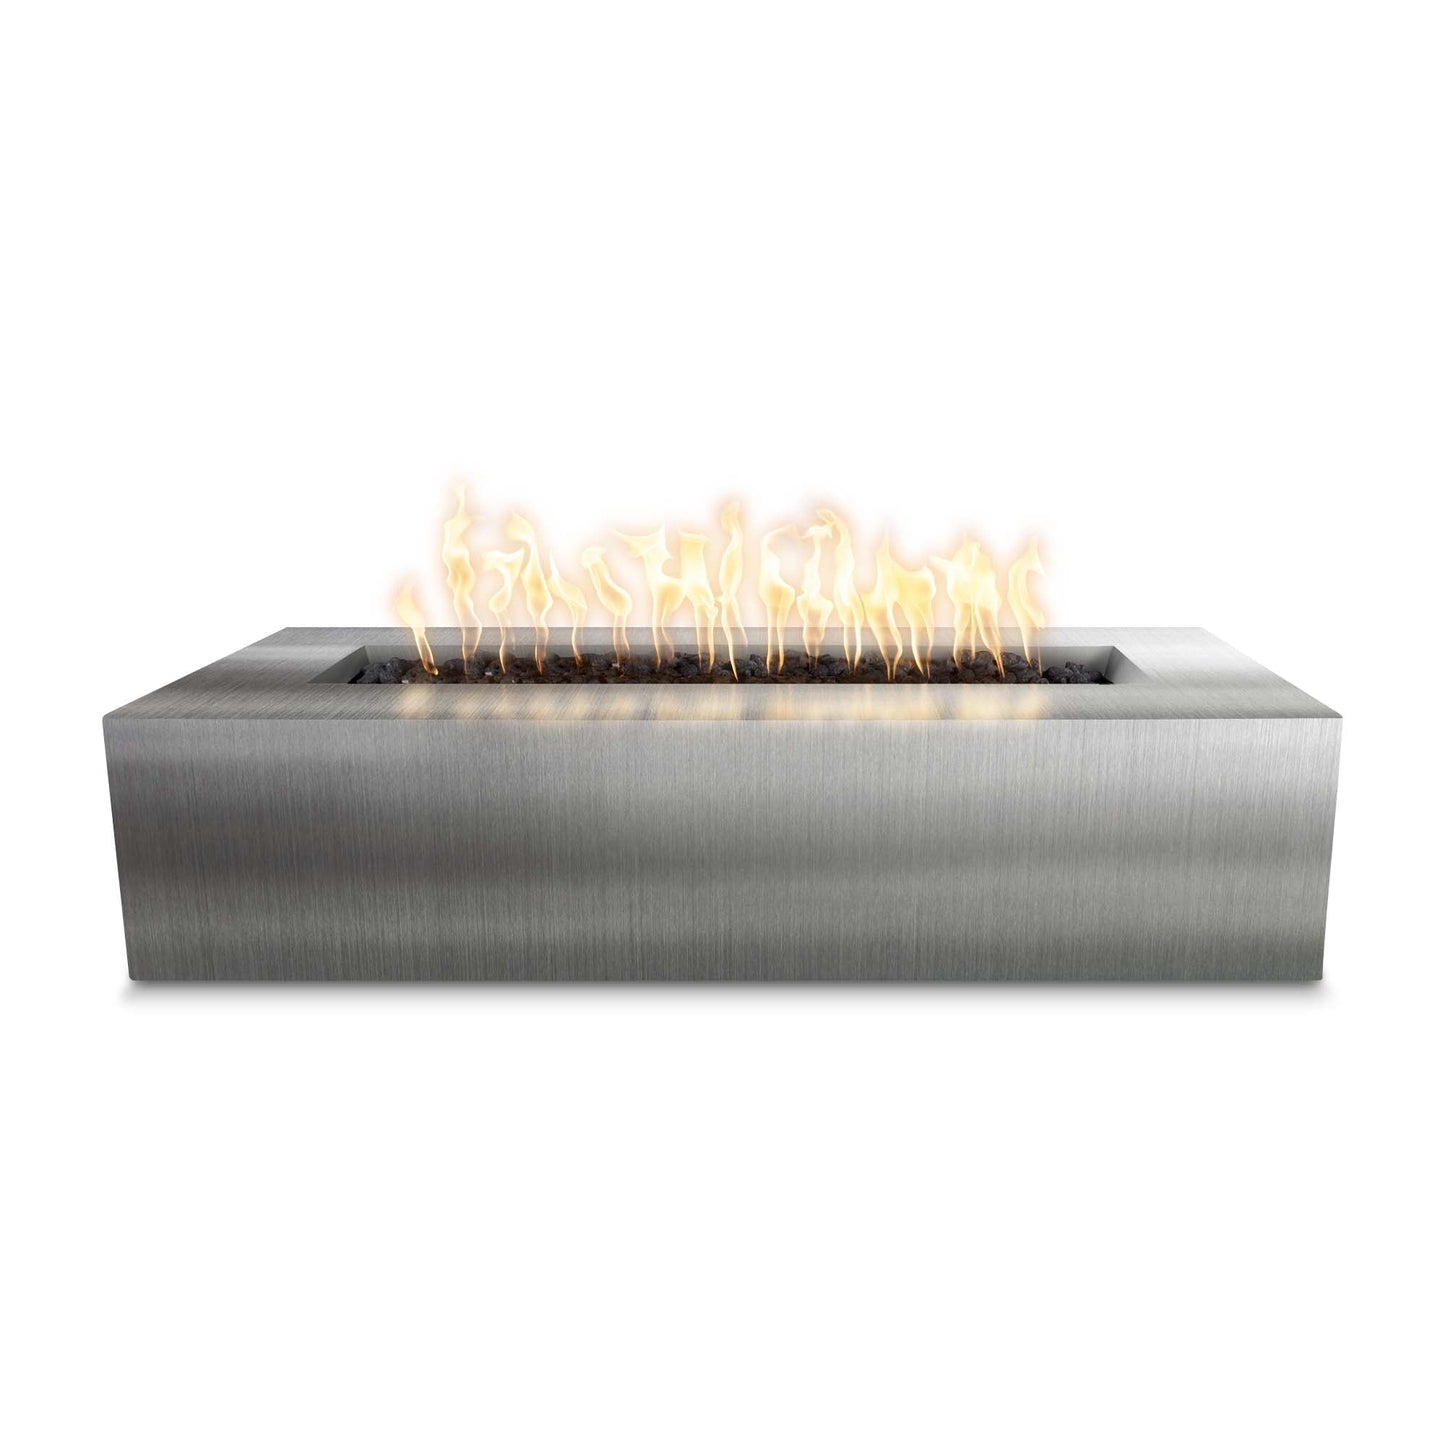 The Outdoor Plus Rectangular Regal 60" Corten Steel Natural Gas Fire Pit with Flame Sense with Spark Ignition